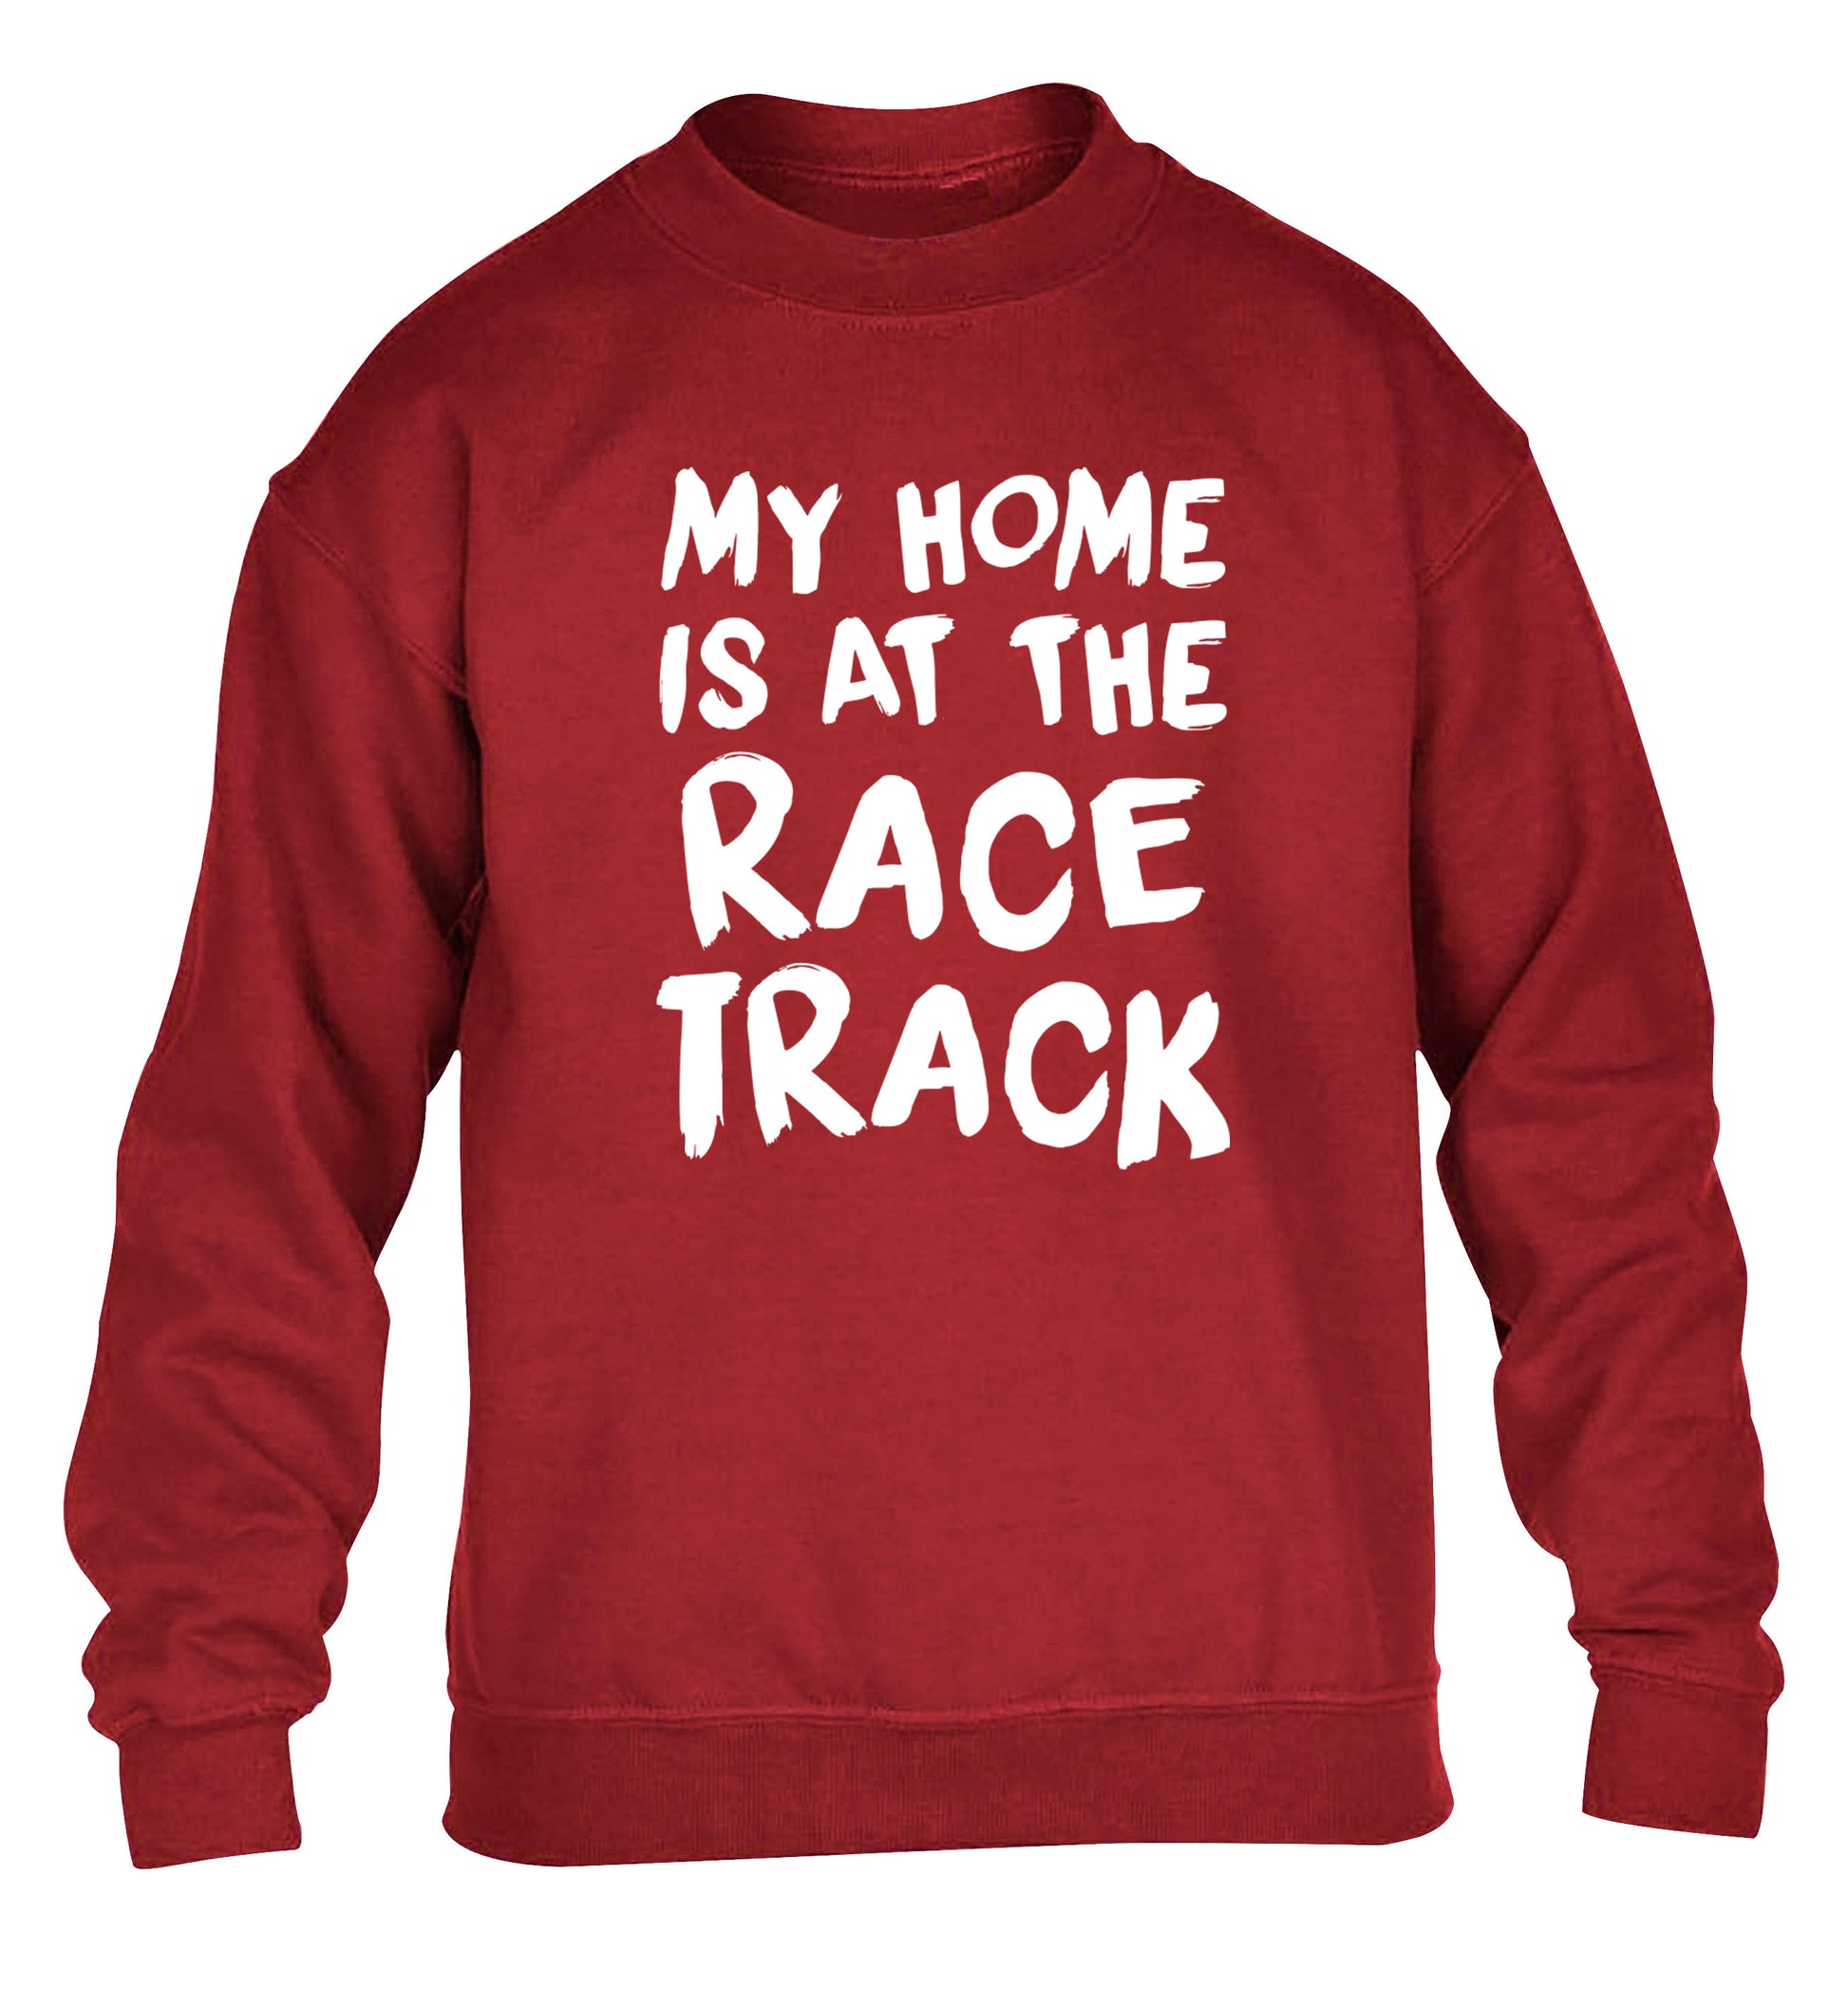 My home is at the race track children's grey sweater 12-14 Years